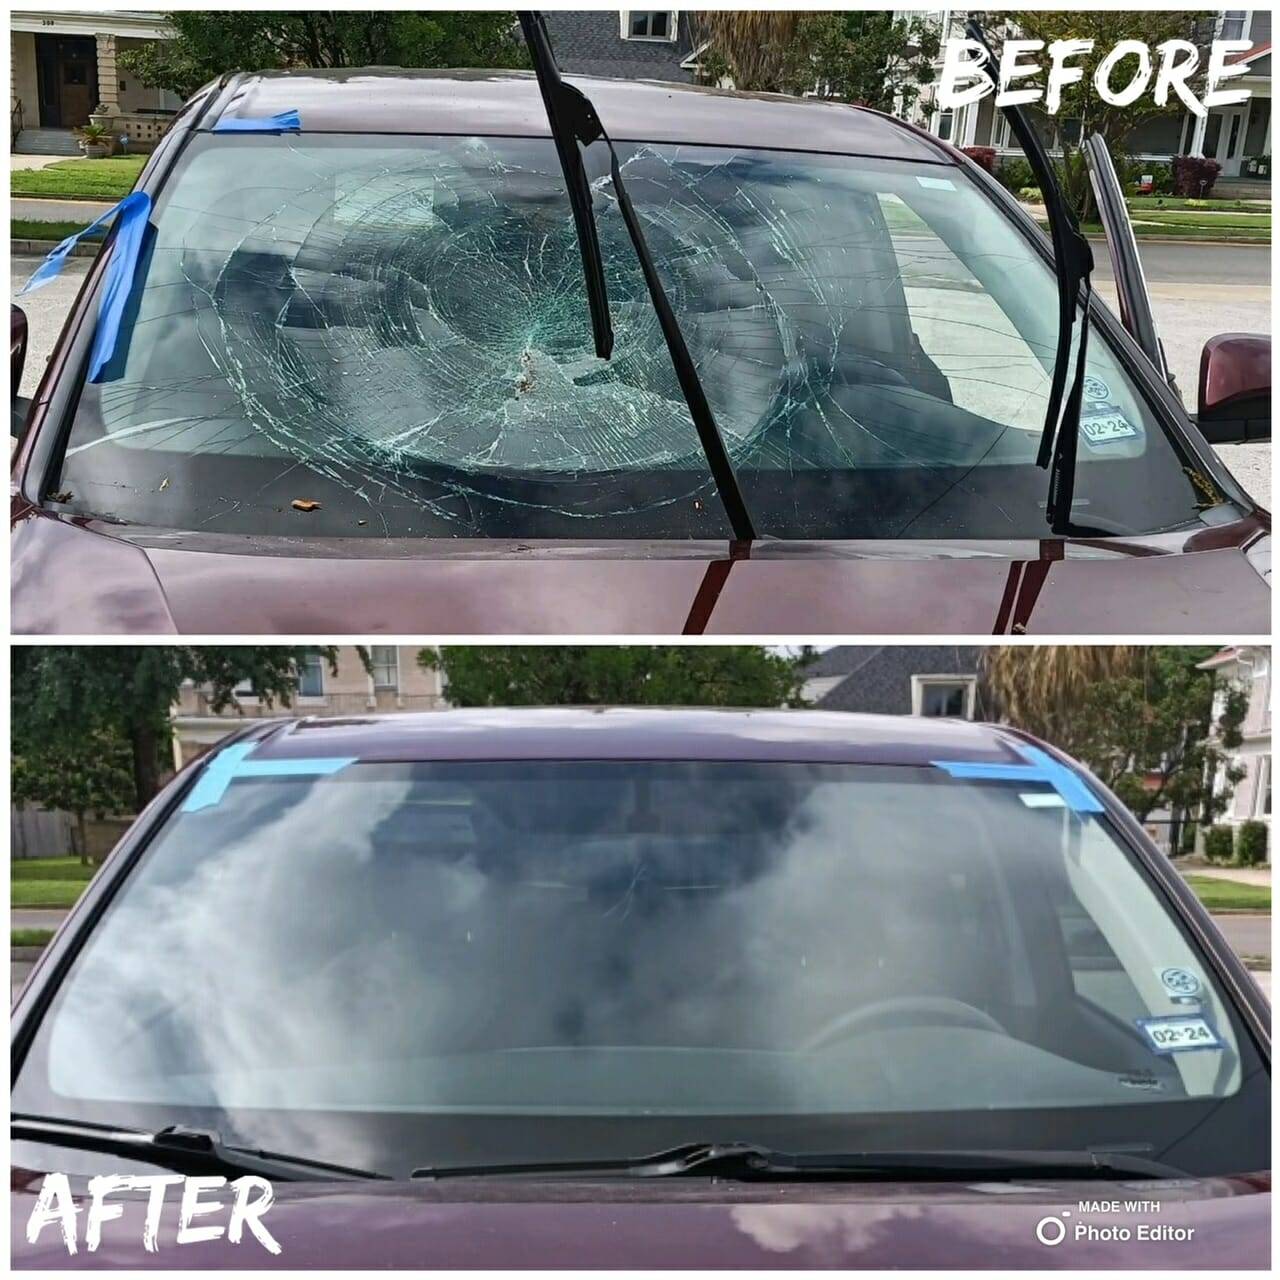 This before and after image showcases the effective repair of a SUV's front windshield in Boerne, Texas. The top half features the damaged glass, broken due to a large impact from an object. The bottom half presents the SUV after the repair, fitted with a new, clear, and intact windshield, highlighting the quality and effectiveness of our windshield replacement service in the Boerne area.